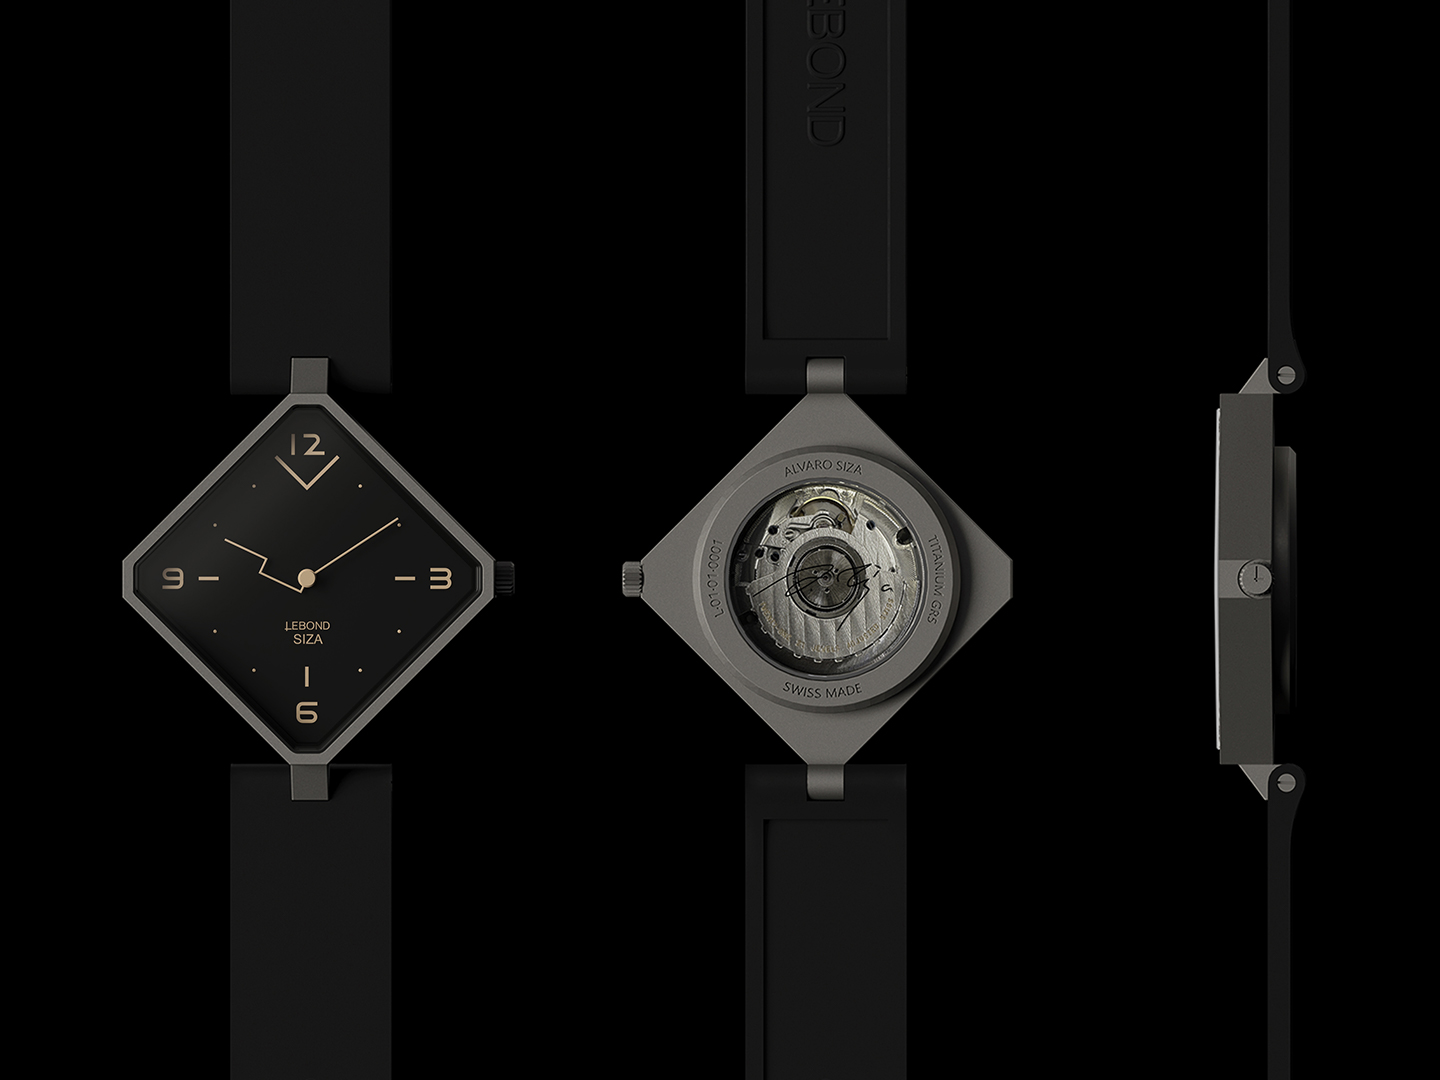 Lebond Siza Watches - Belvedere Agency